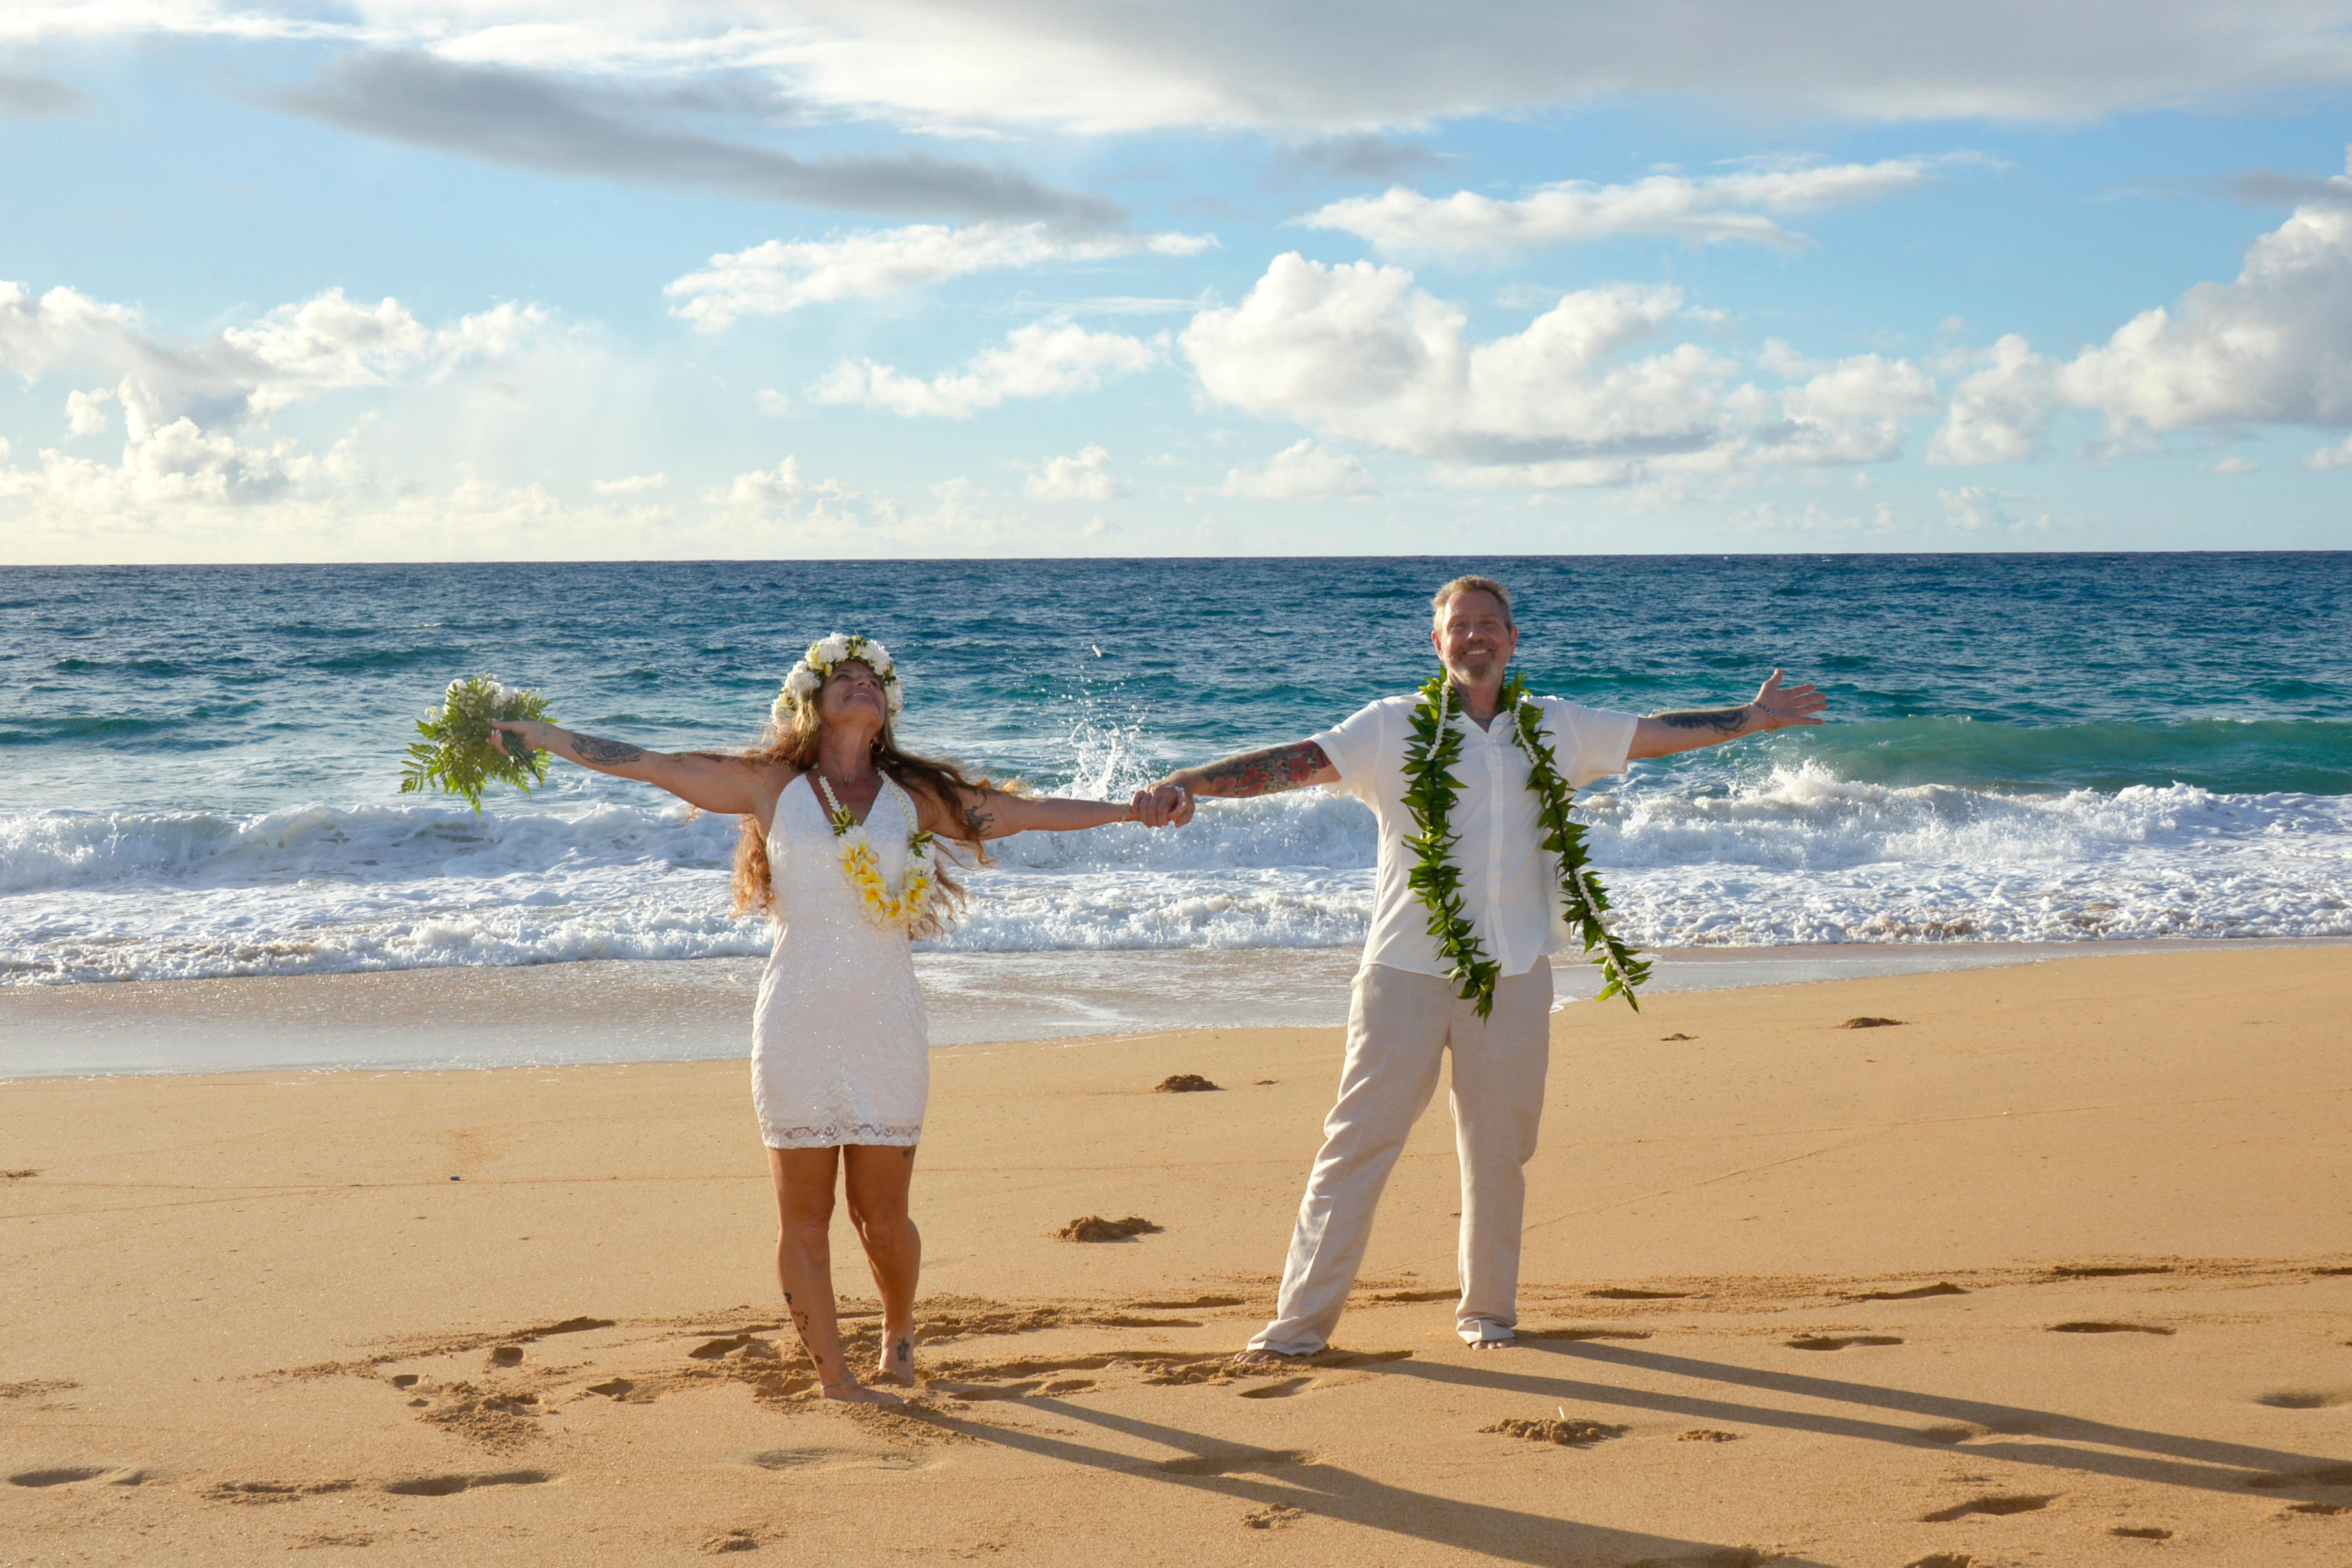 Trust Reflections Kauai Photography to make your special day unforgettable. Our wedding photographers are experts at capturing the beauty, emotion, and essence of your Kauai wedding, ensuring you have cherished memories to treasure forever.